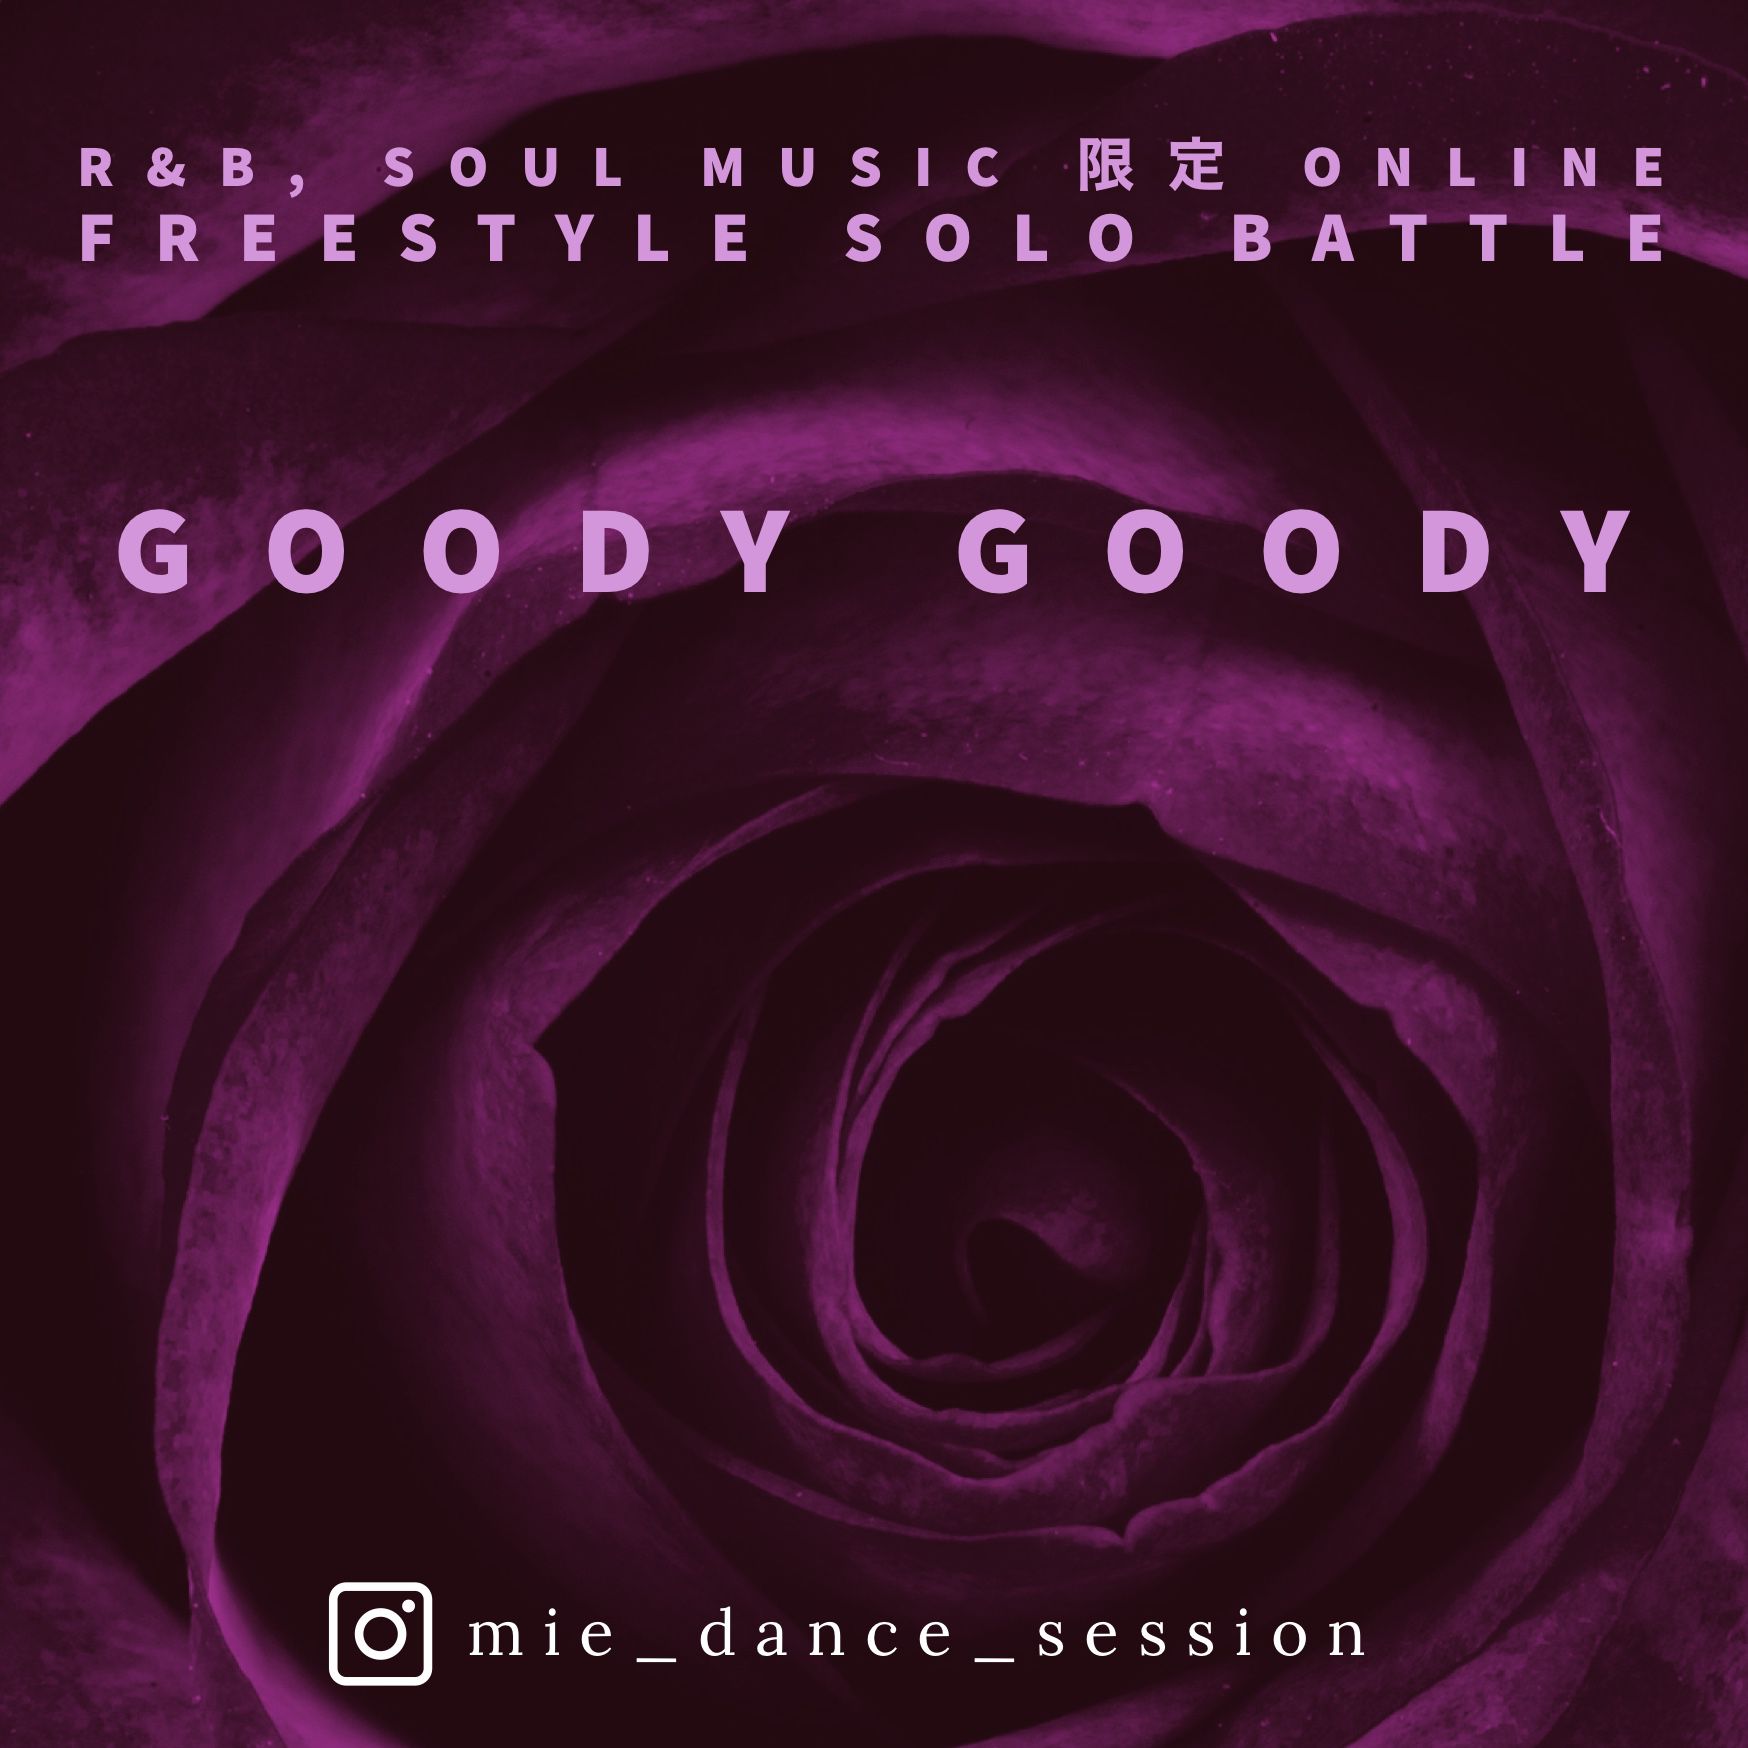 Enter The Stage R B Soul Music 限定 Online Freestyle Solo Battle Goody Goody